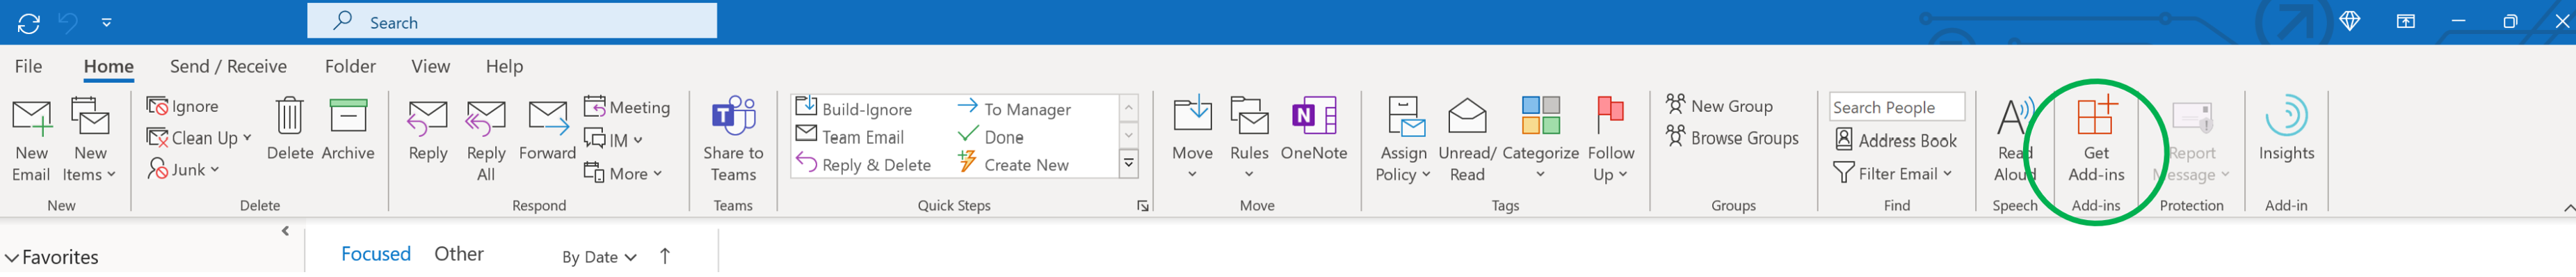 Check Outlook 2016 Add-in Support